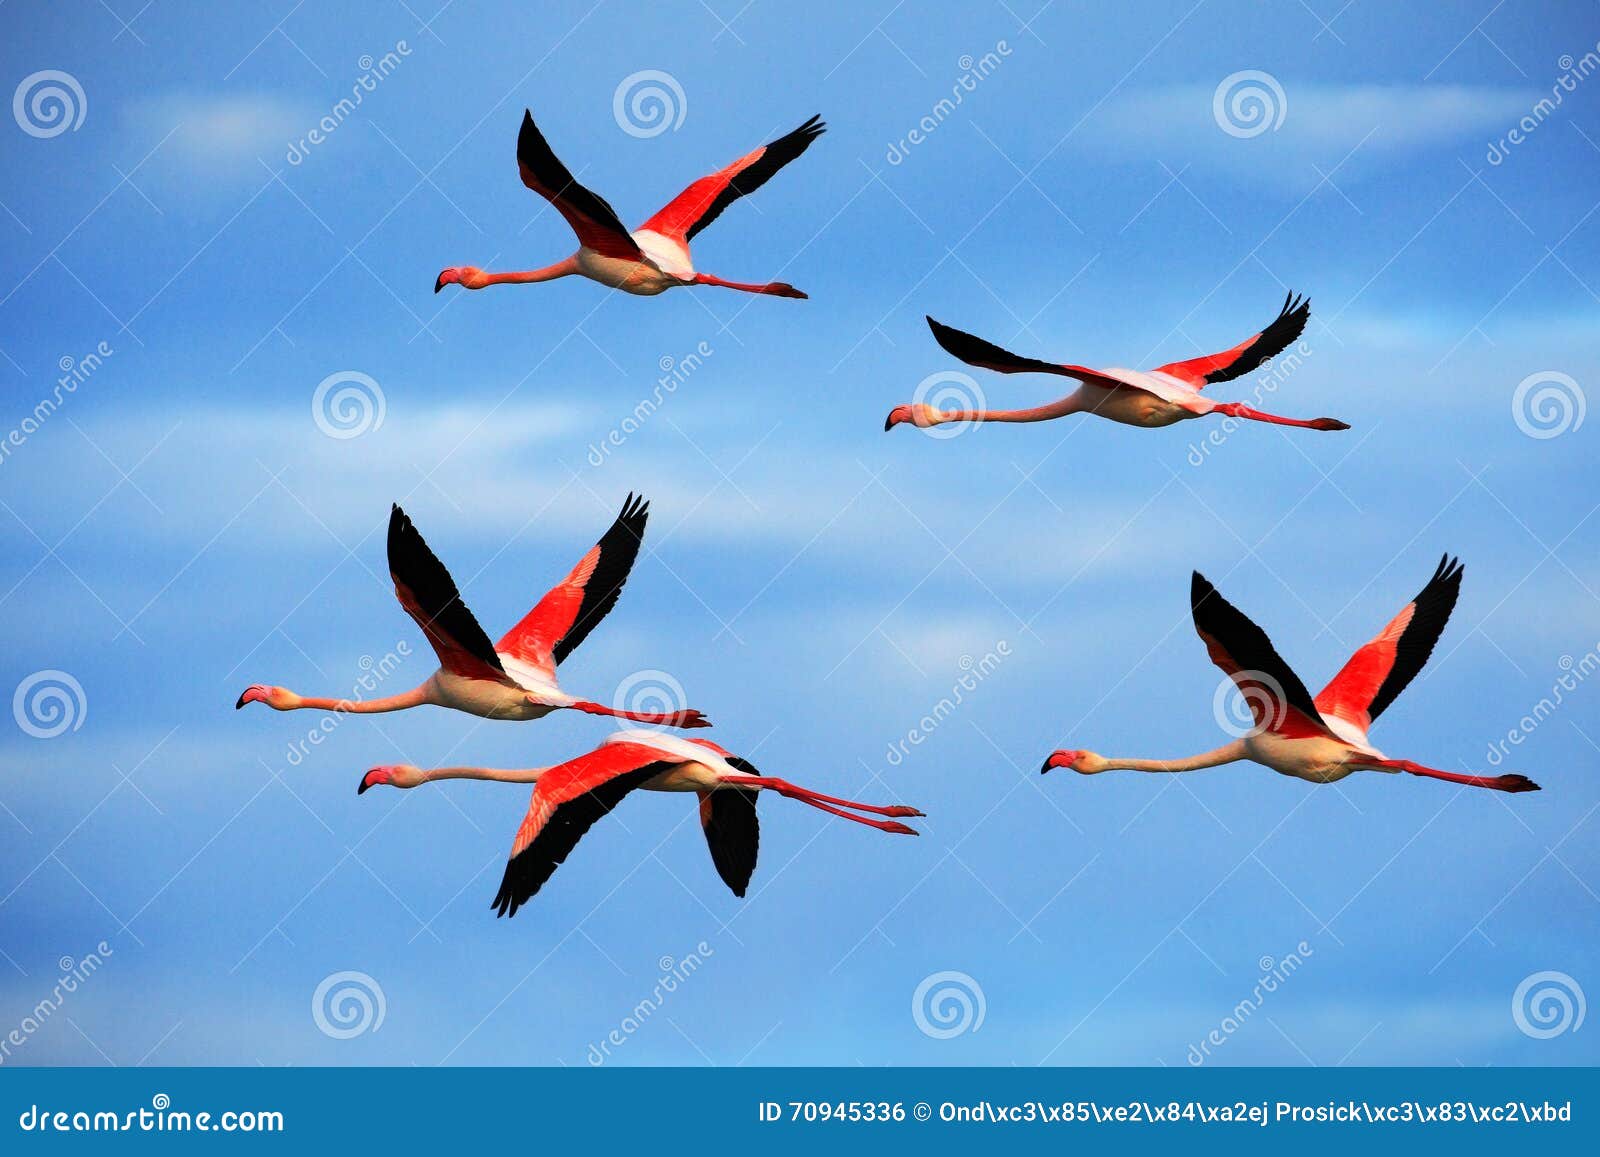 flying pair of nice pink big bird greater flamingo, phoenicopterus ruber, with clear blue sky with clouds, camargue, france